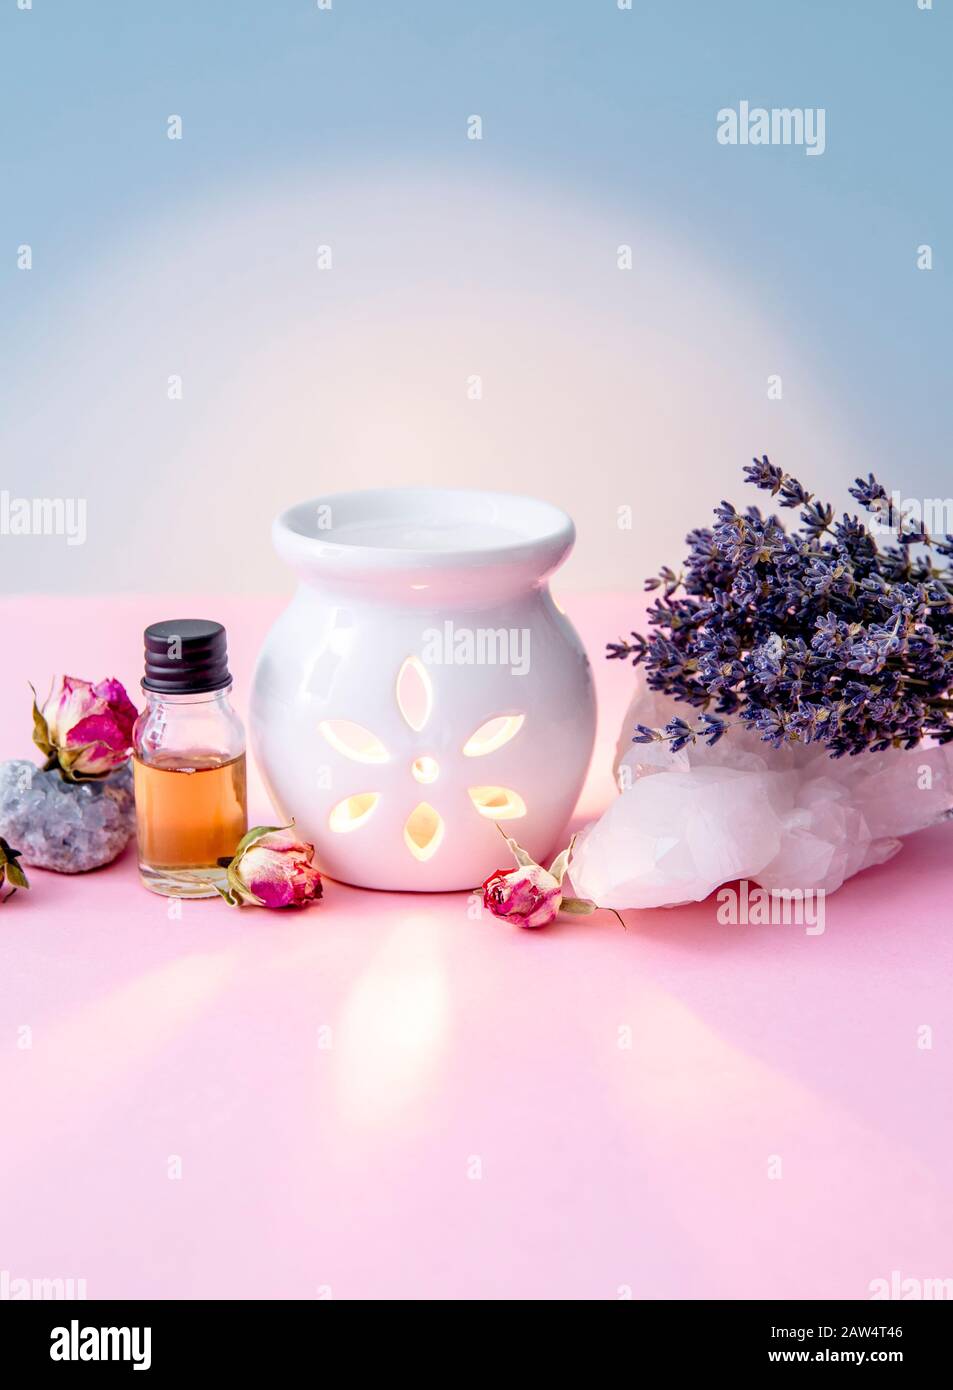 White ceramic candle aroma oil lamp with essential oil bottle and dried flowers, crystal geodes on modern pastel pink and blue background indoors. Stock Photo